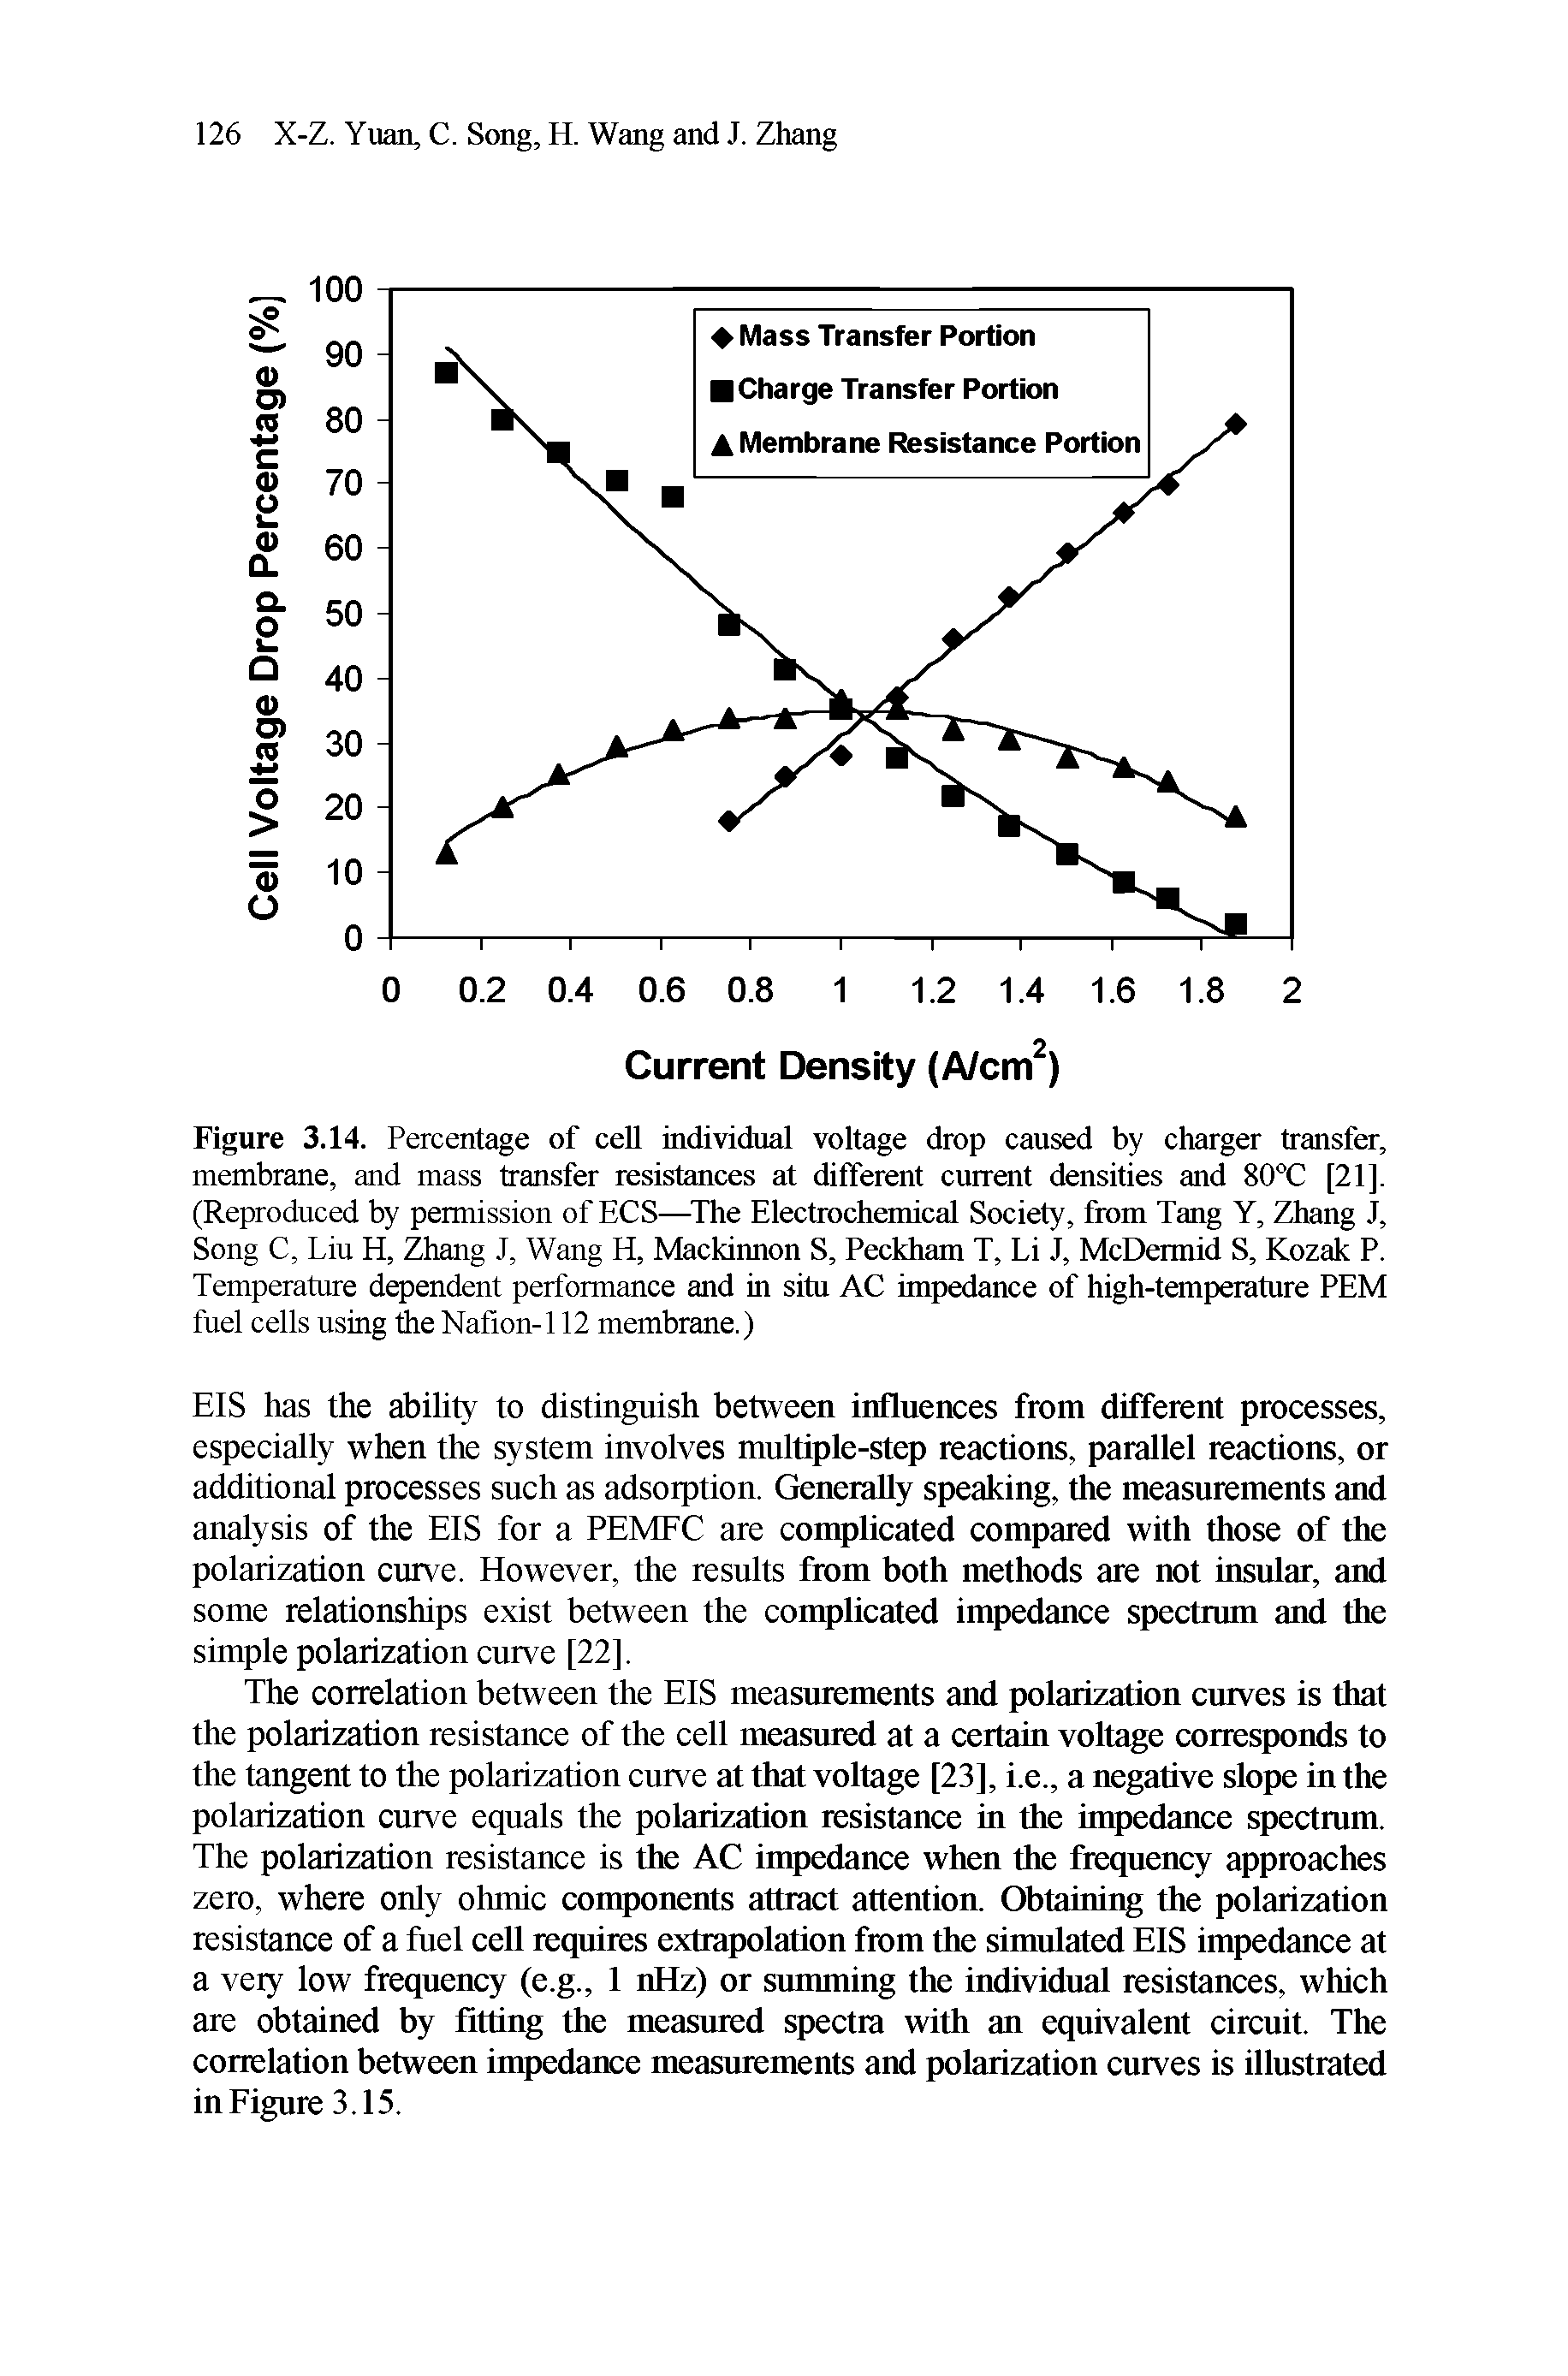 Figure 3.14. Percentage of cell individual voltage drop caused by charger transfer, membrane, and mass transfer resistances at different current densities and 80°C [21]. (Reproduced by permission of ECS—The Electrochemical Society, from Tang Y, Zhang J, Song C, Liu H, Zhang J, Wang H, Mackinnon S, Peckham T, Li J, McDermid S, Kozak P. Temperature dependent performance and in situ AC impedance of high-temperature PEM fuel cells using the Nafion-112 membrane.)...